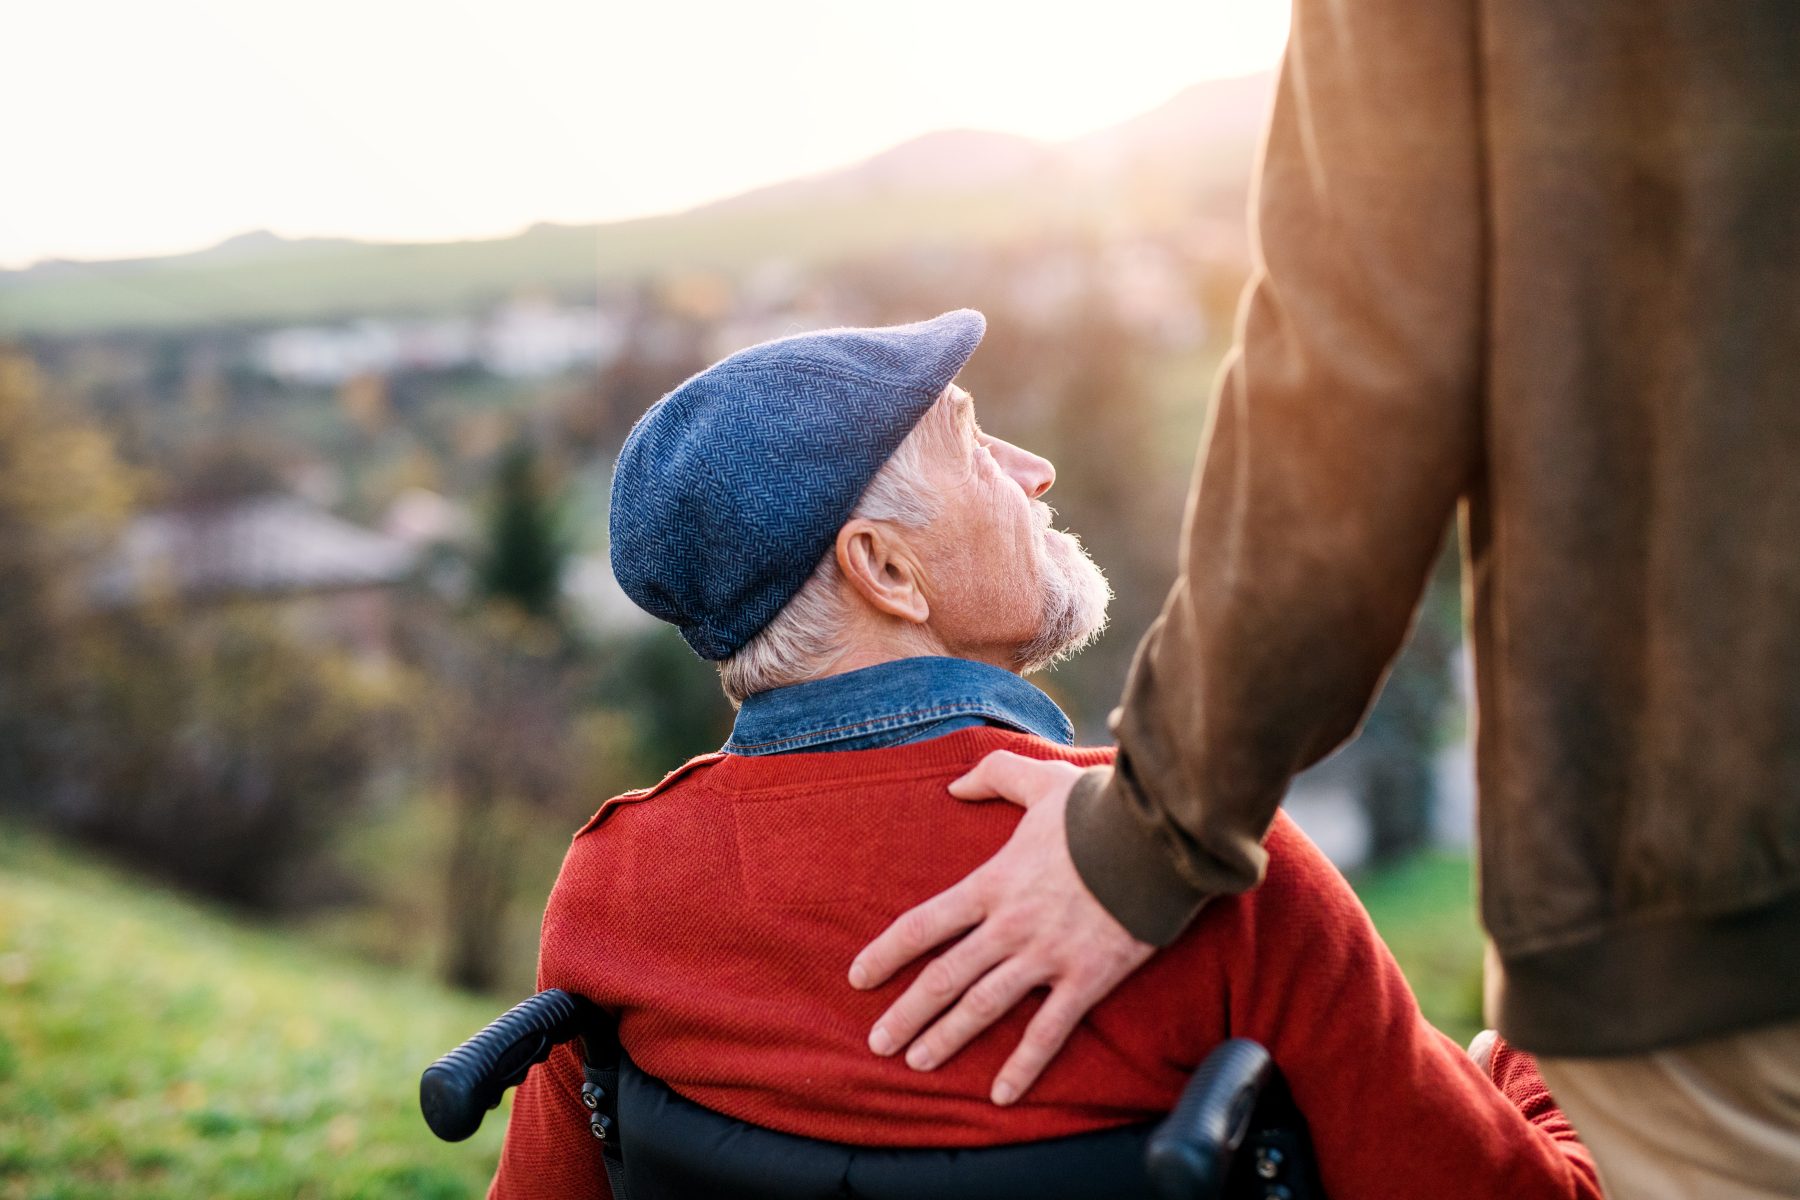 Man in wheelchair enjoying a landscape view with another man touching his shoulder